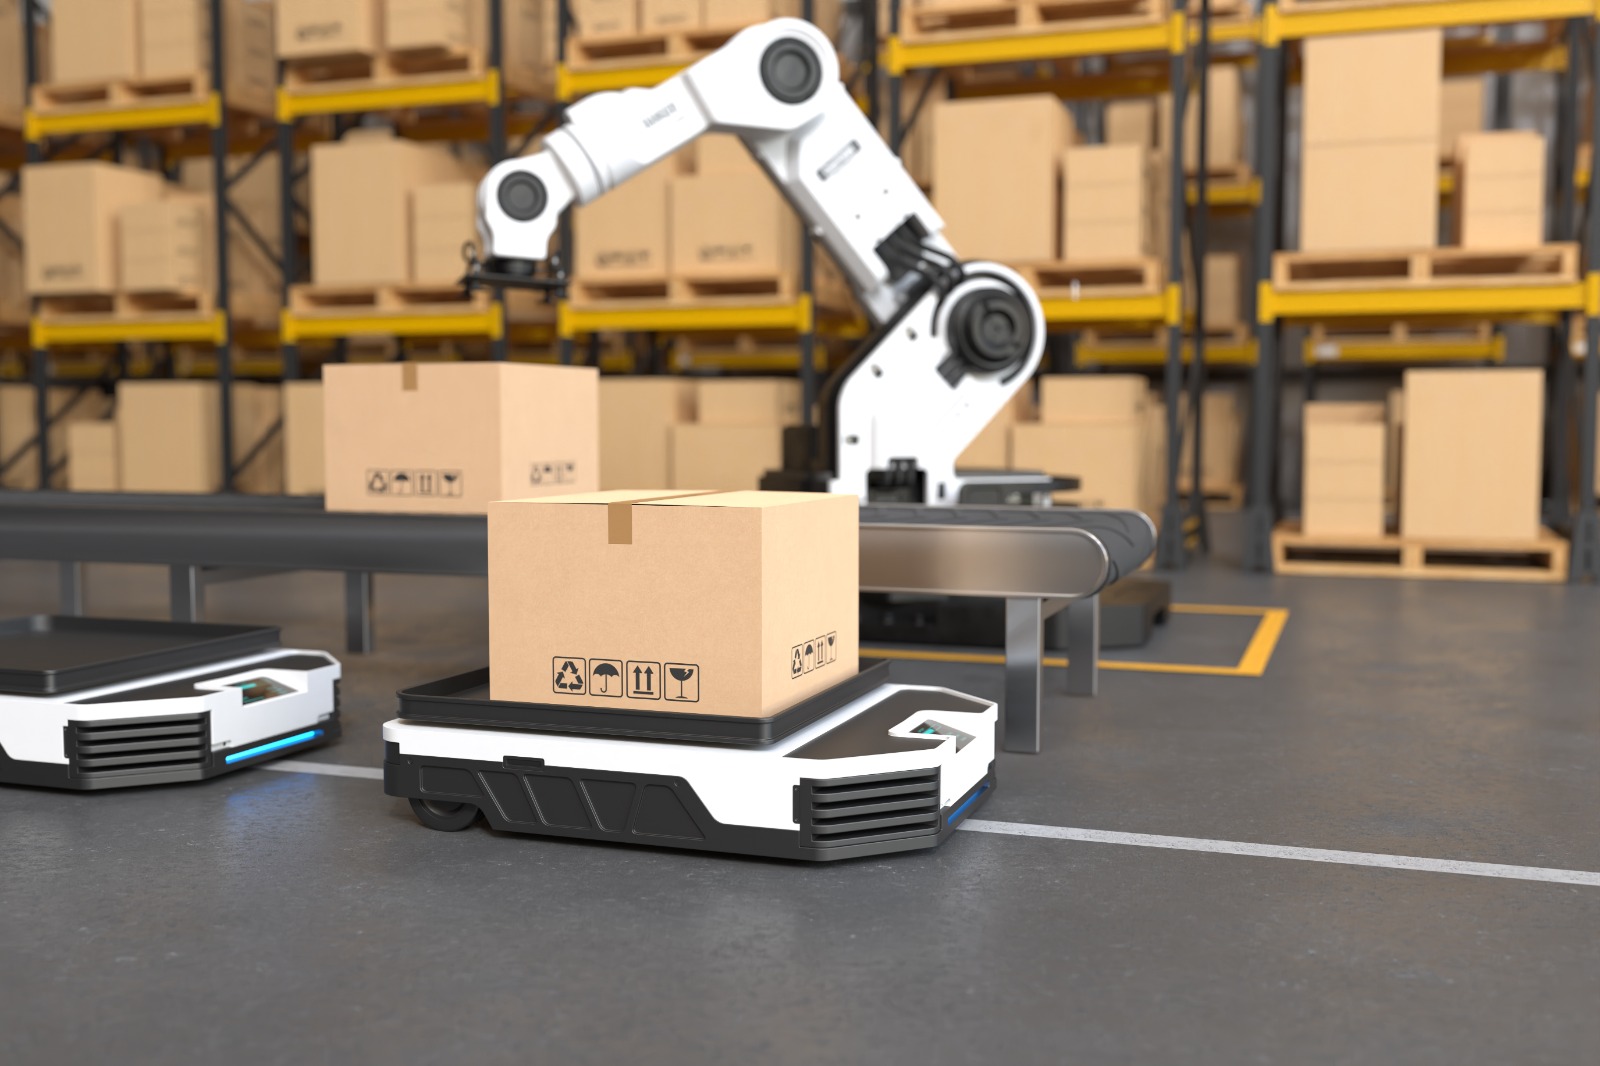 robot working on box in storage facility